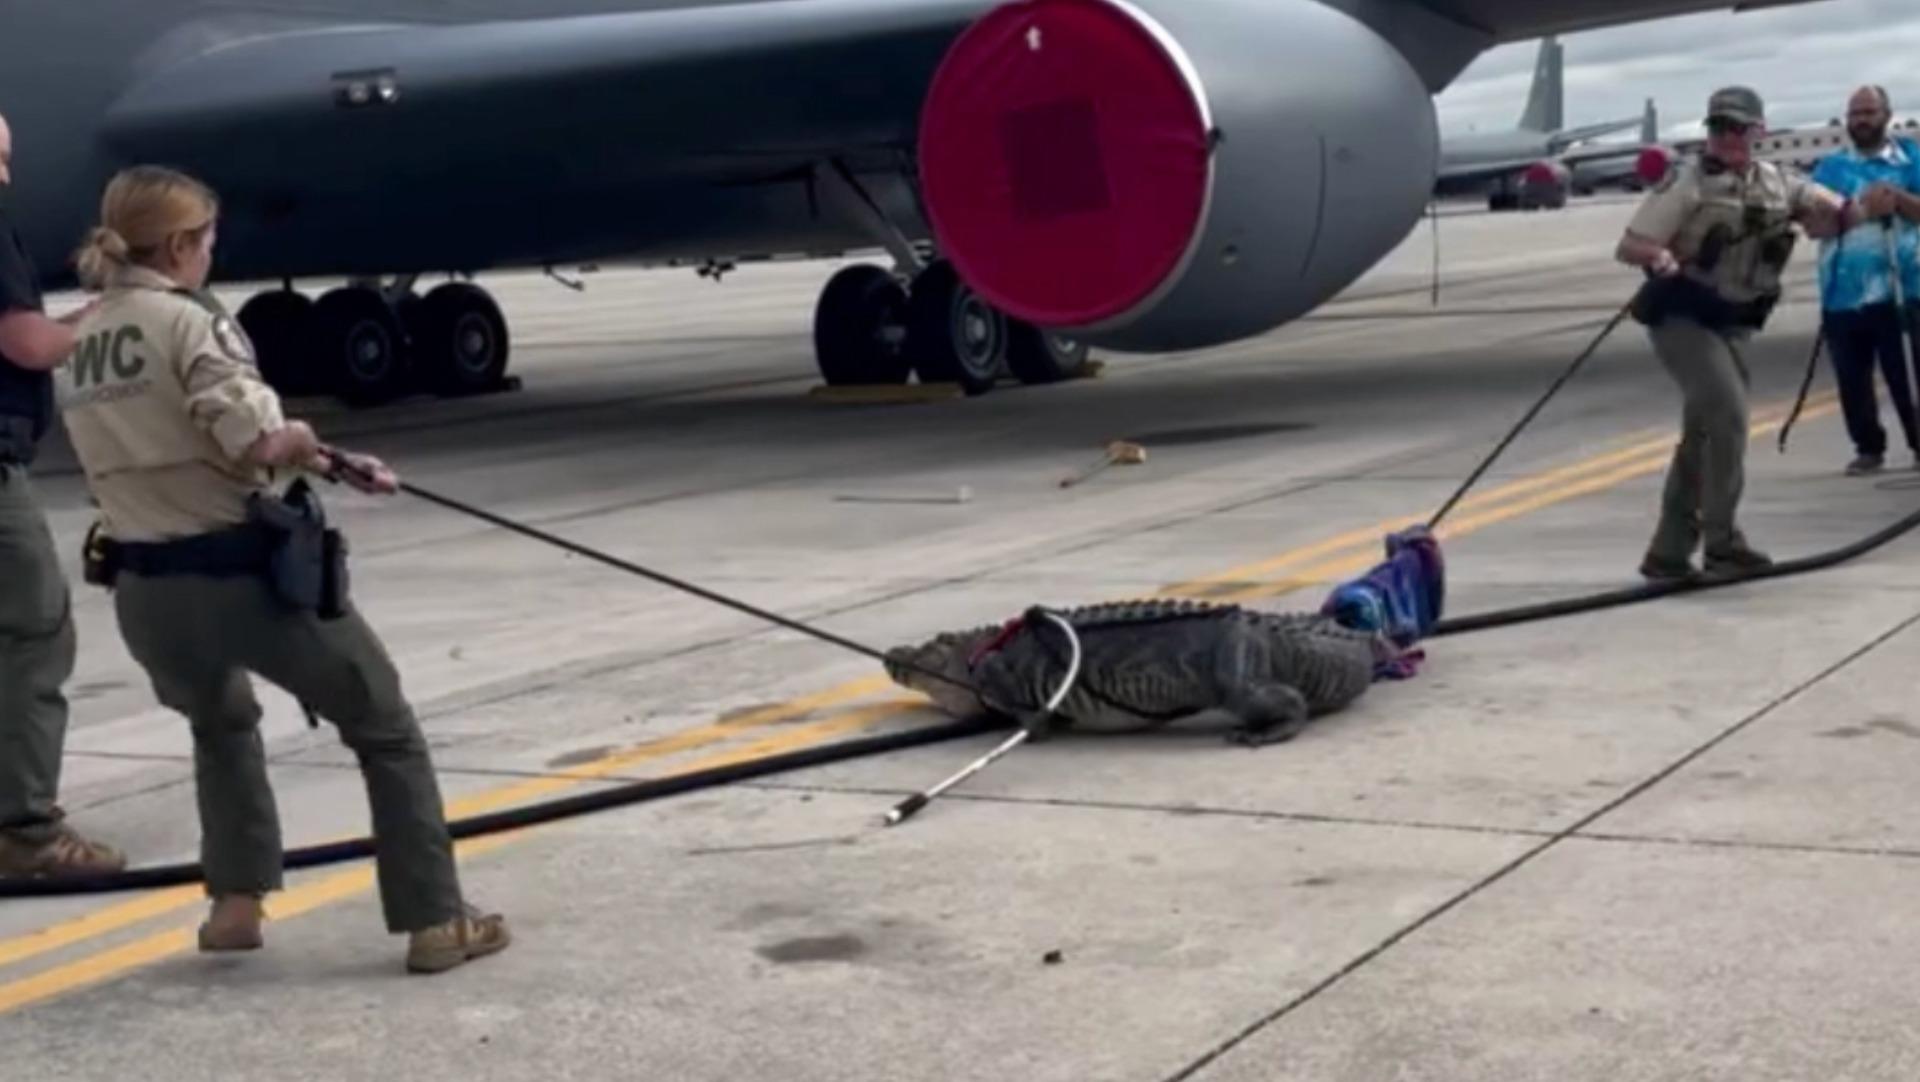 Video shows Florida authorities wrangling huge alligator at Air Force base